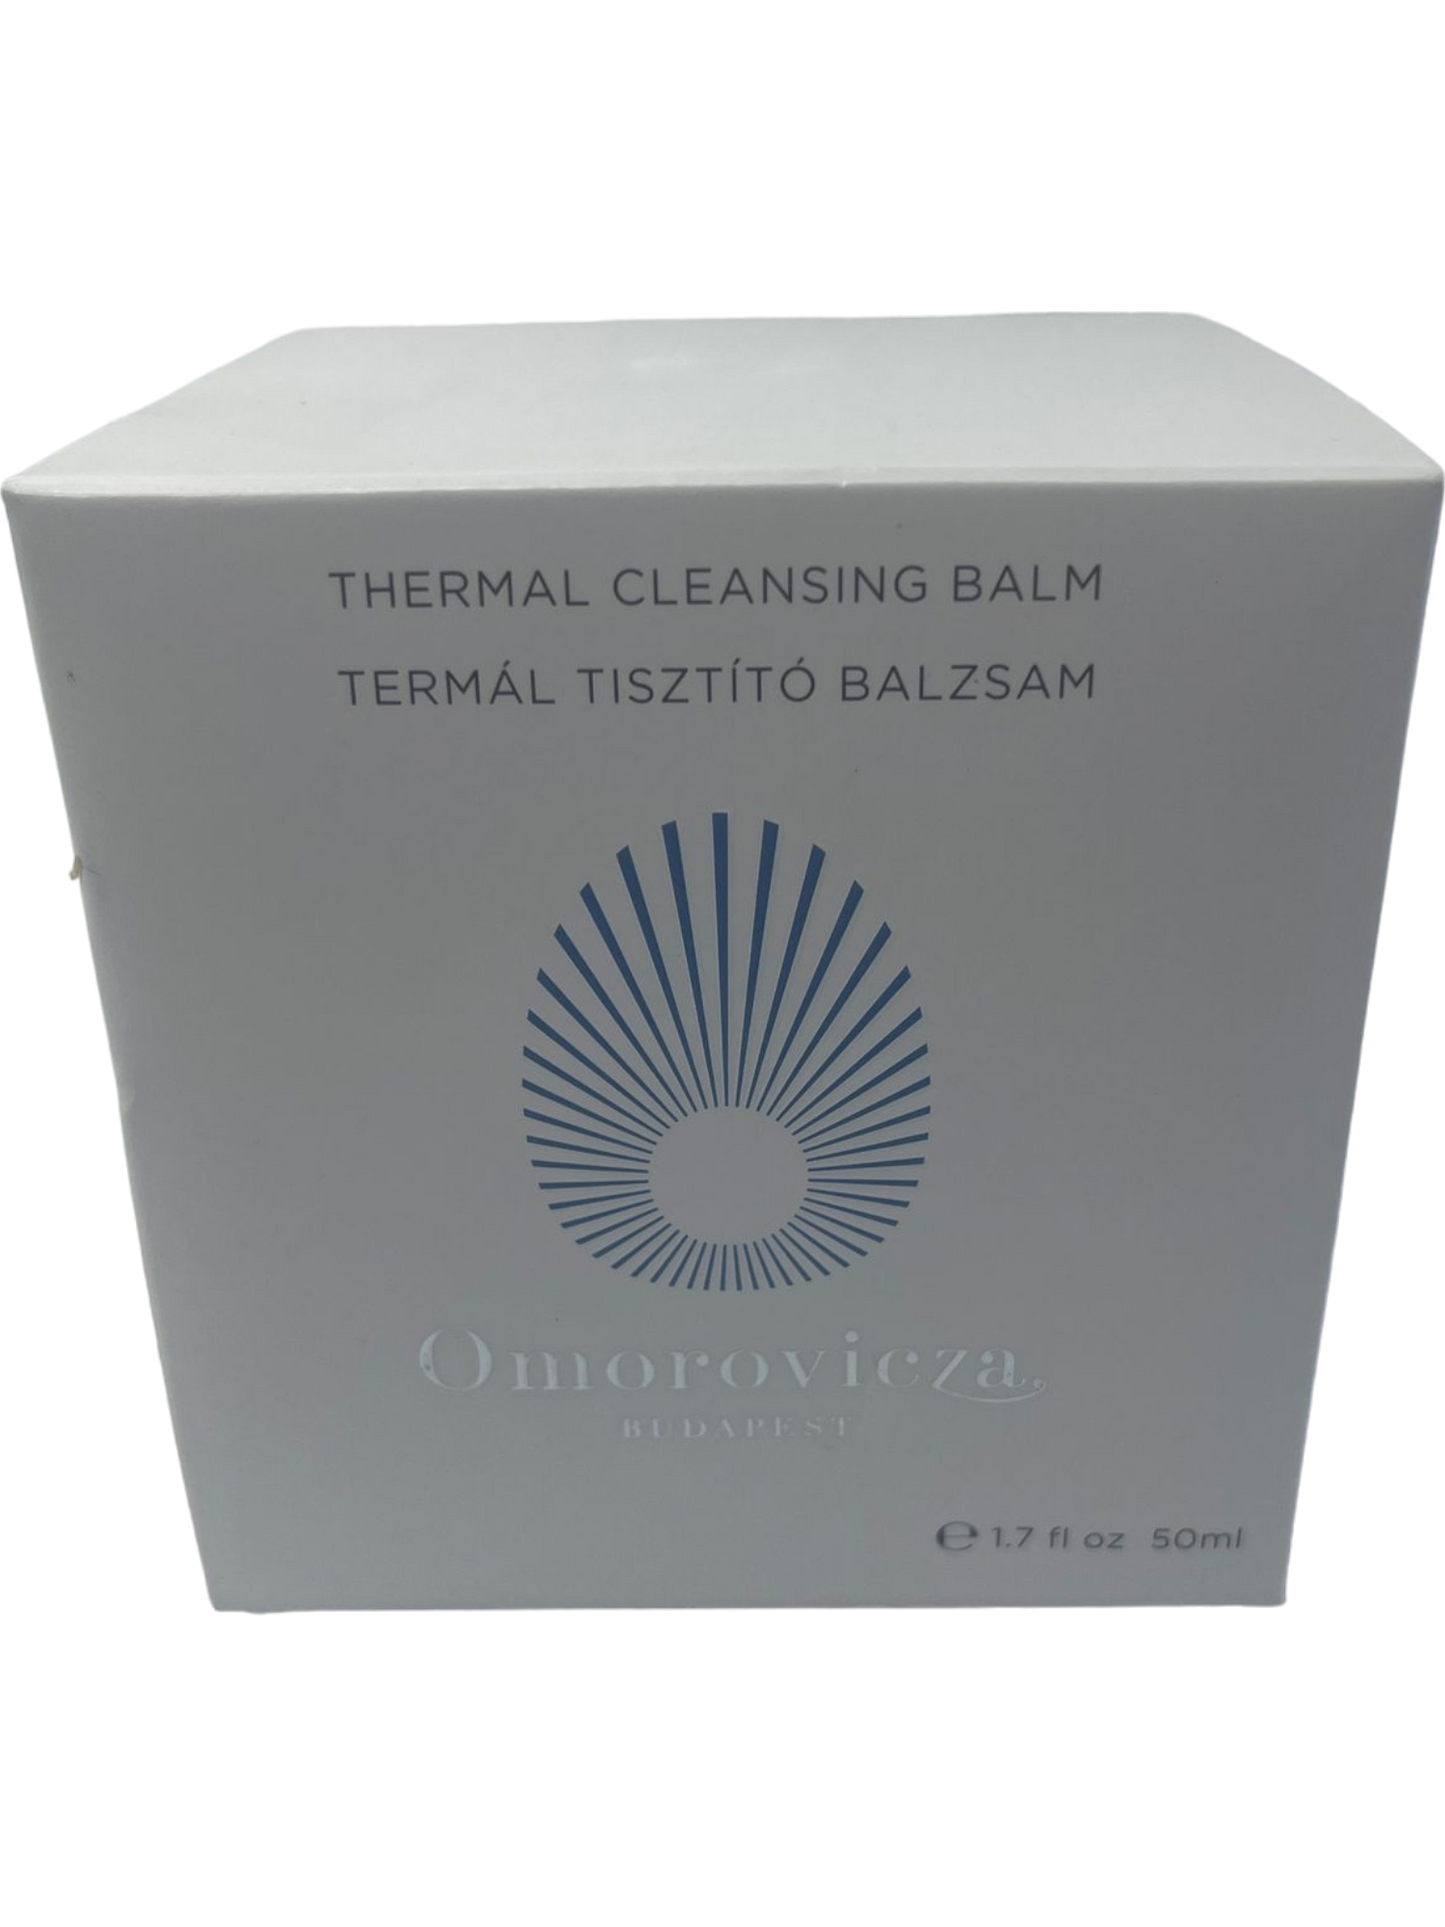 Omorovicza Thermal Cleansing Balm Skin Care Facial Cleanser